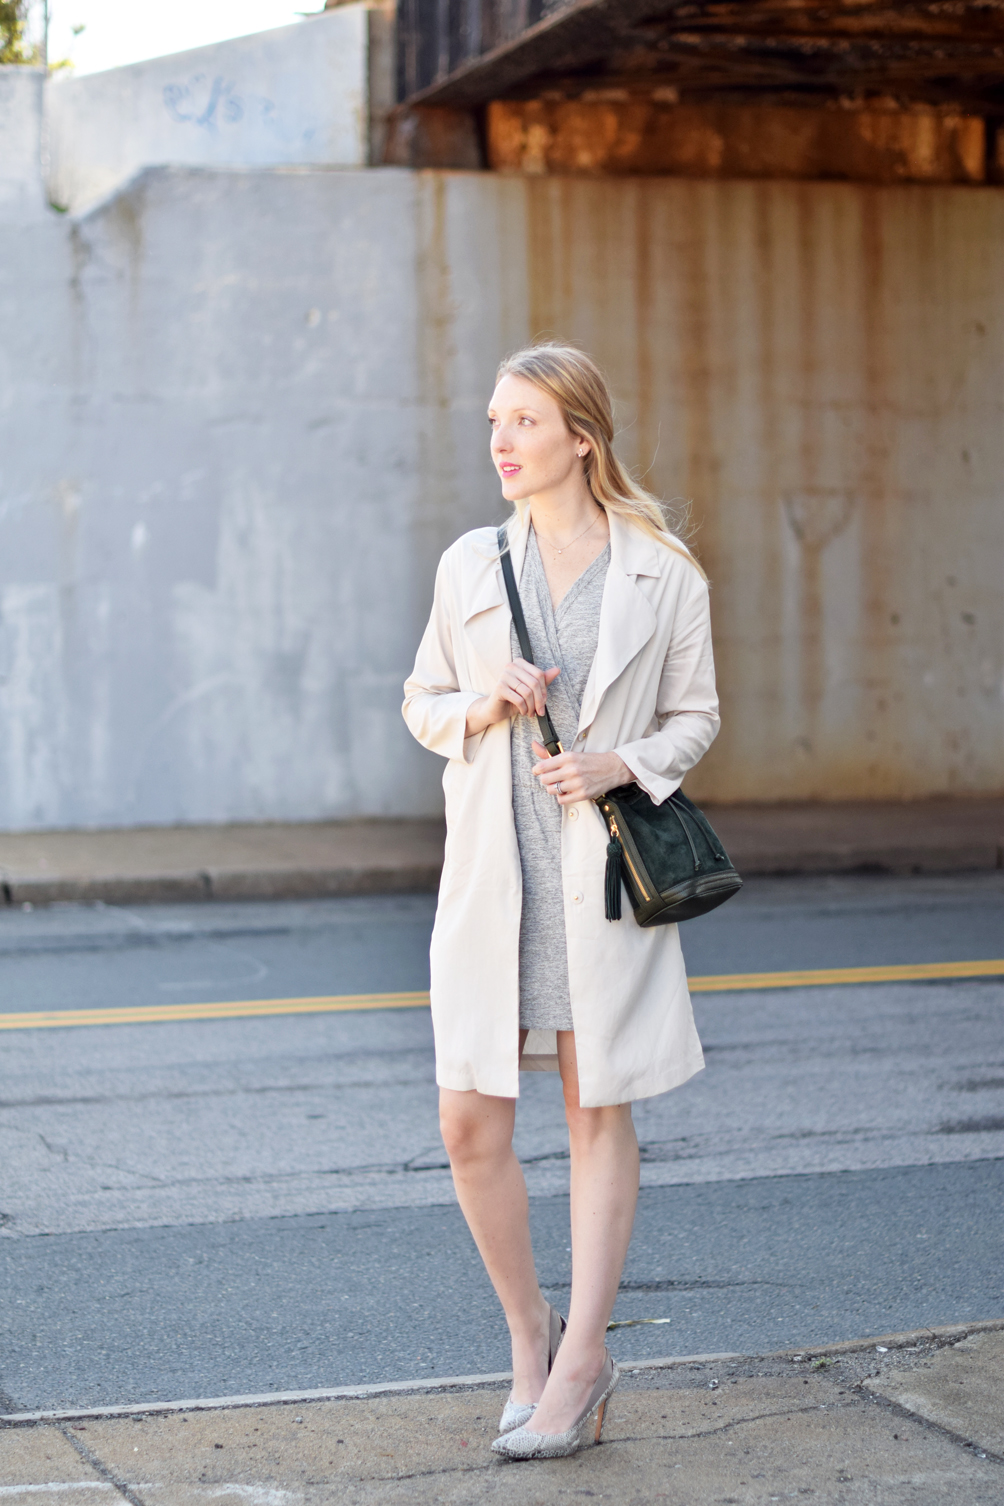 crossover blouson dress with a spring trench coat and snakeskin heels - leslie musser, one brass fox